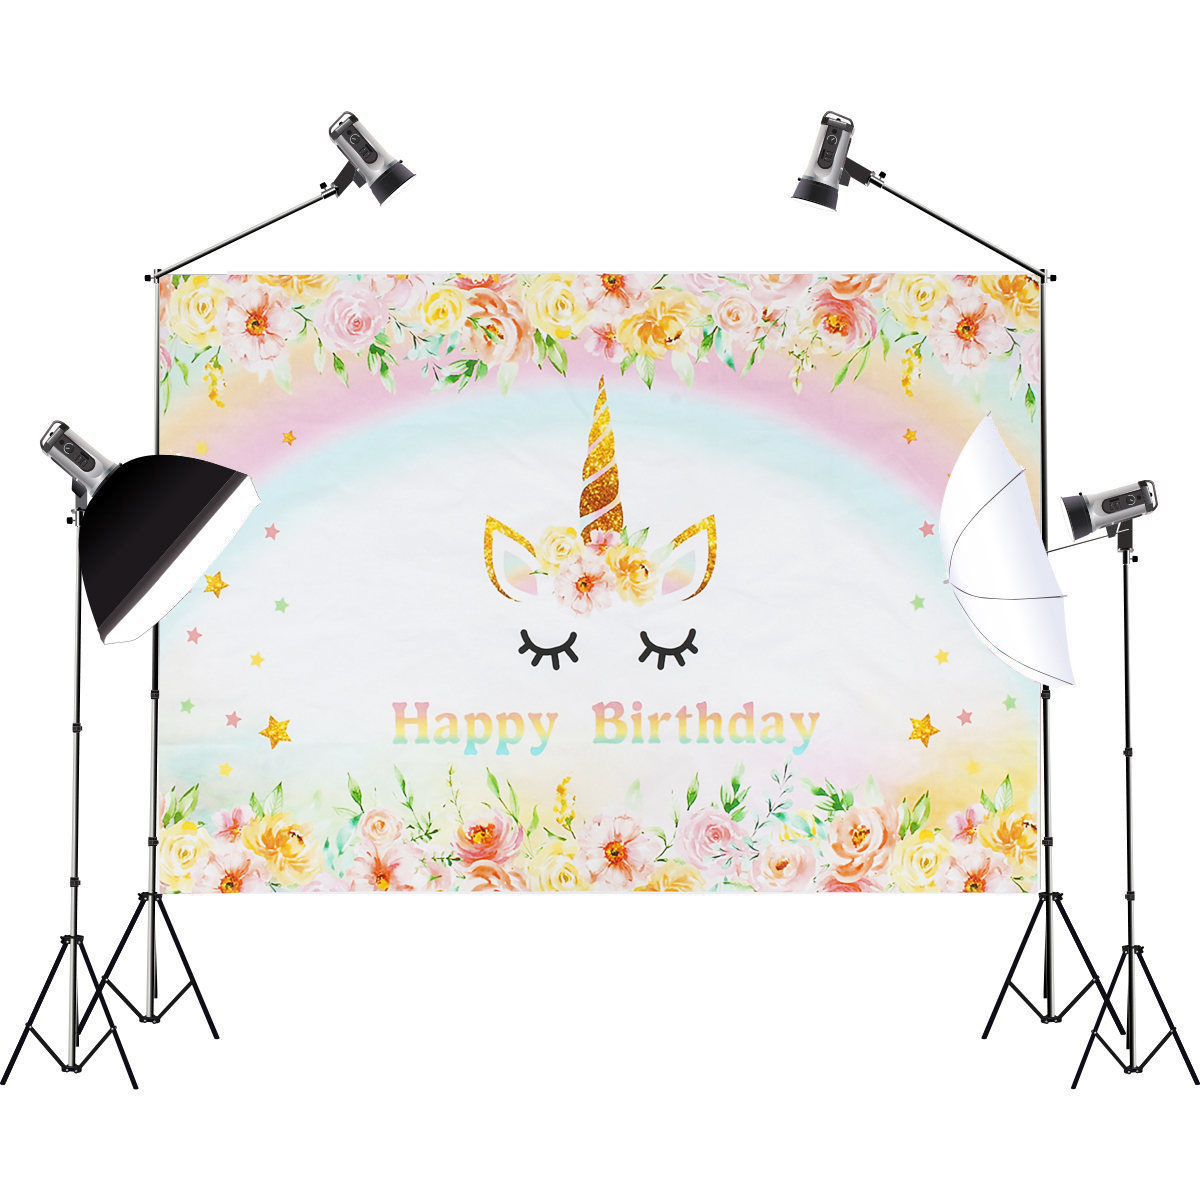 Find 3x5FT 5x7FT Vinyl Gold Unicorn Happy Birthday Photography Backdrop Background Studio Prop for Sale on Gipsybee.com with cryptocurrencies